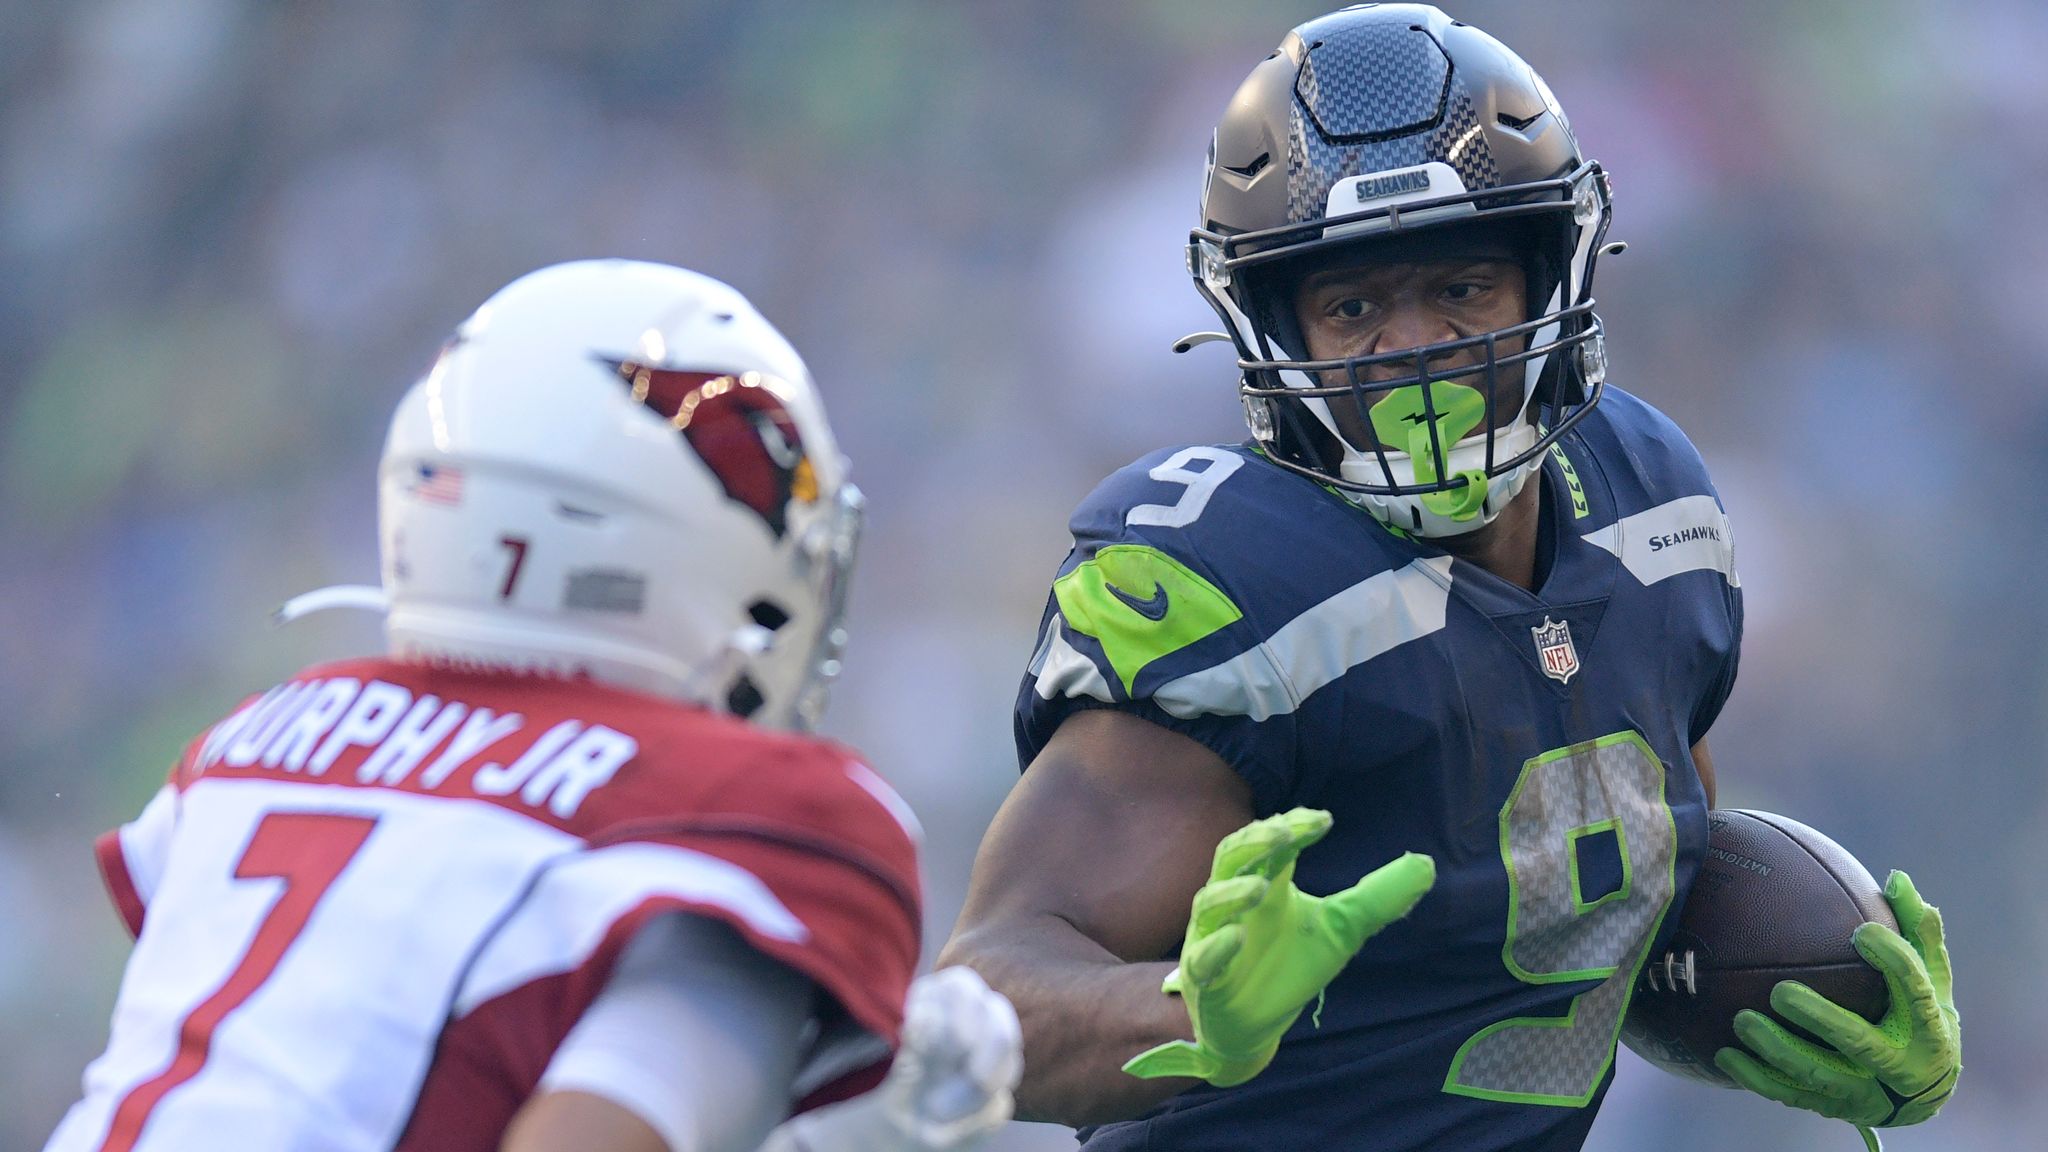 Seahawks vs. 49ers Gameday Info: How to watch, stream Week 15 matchup